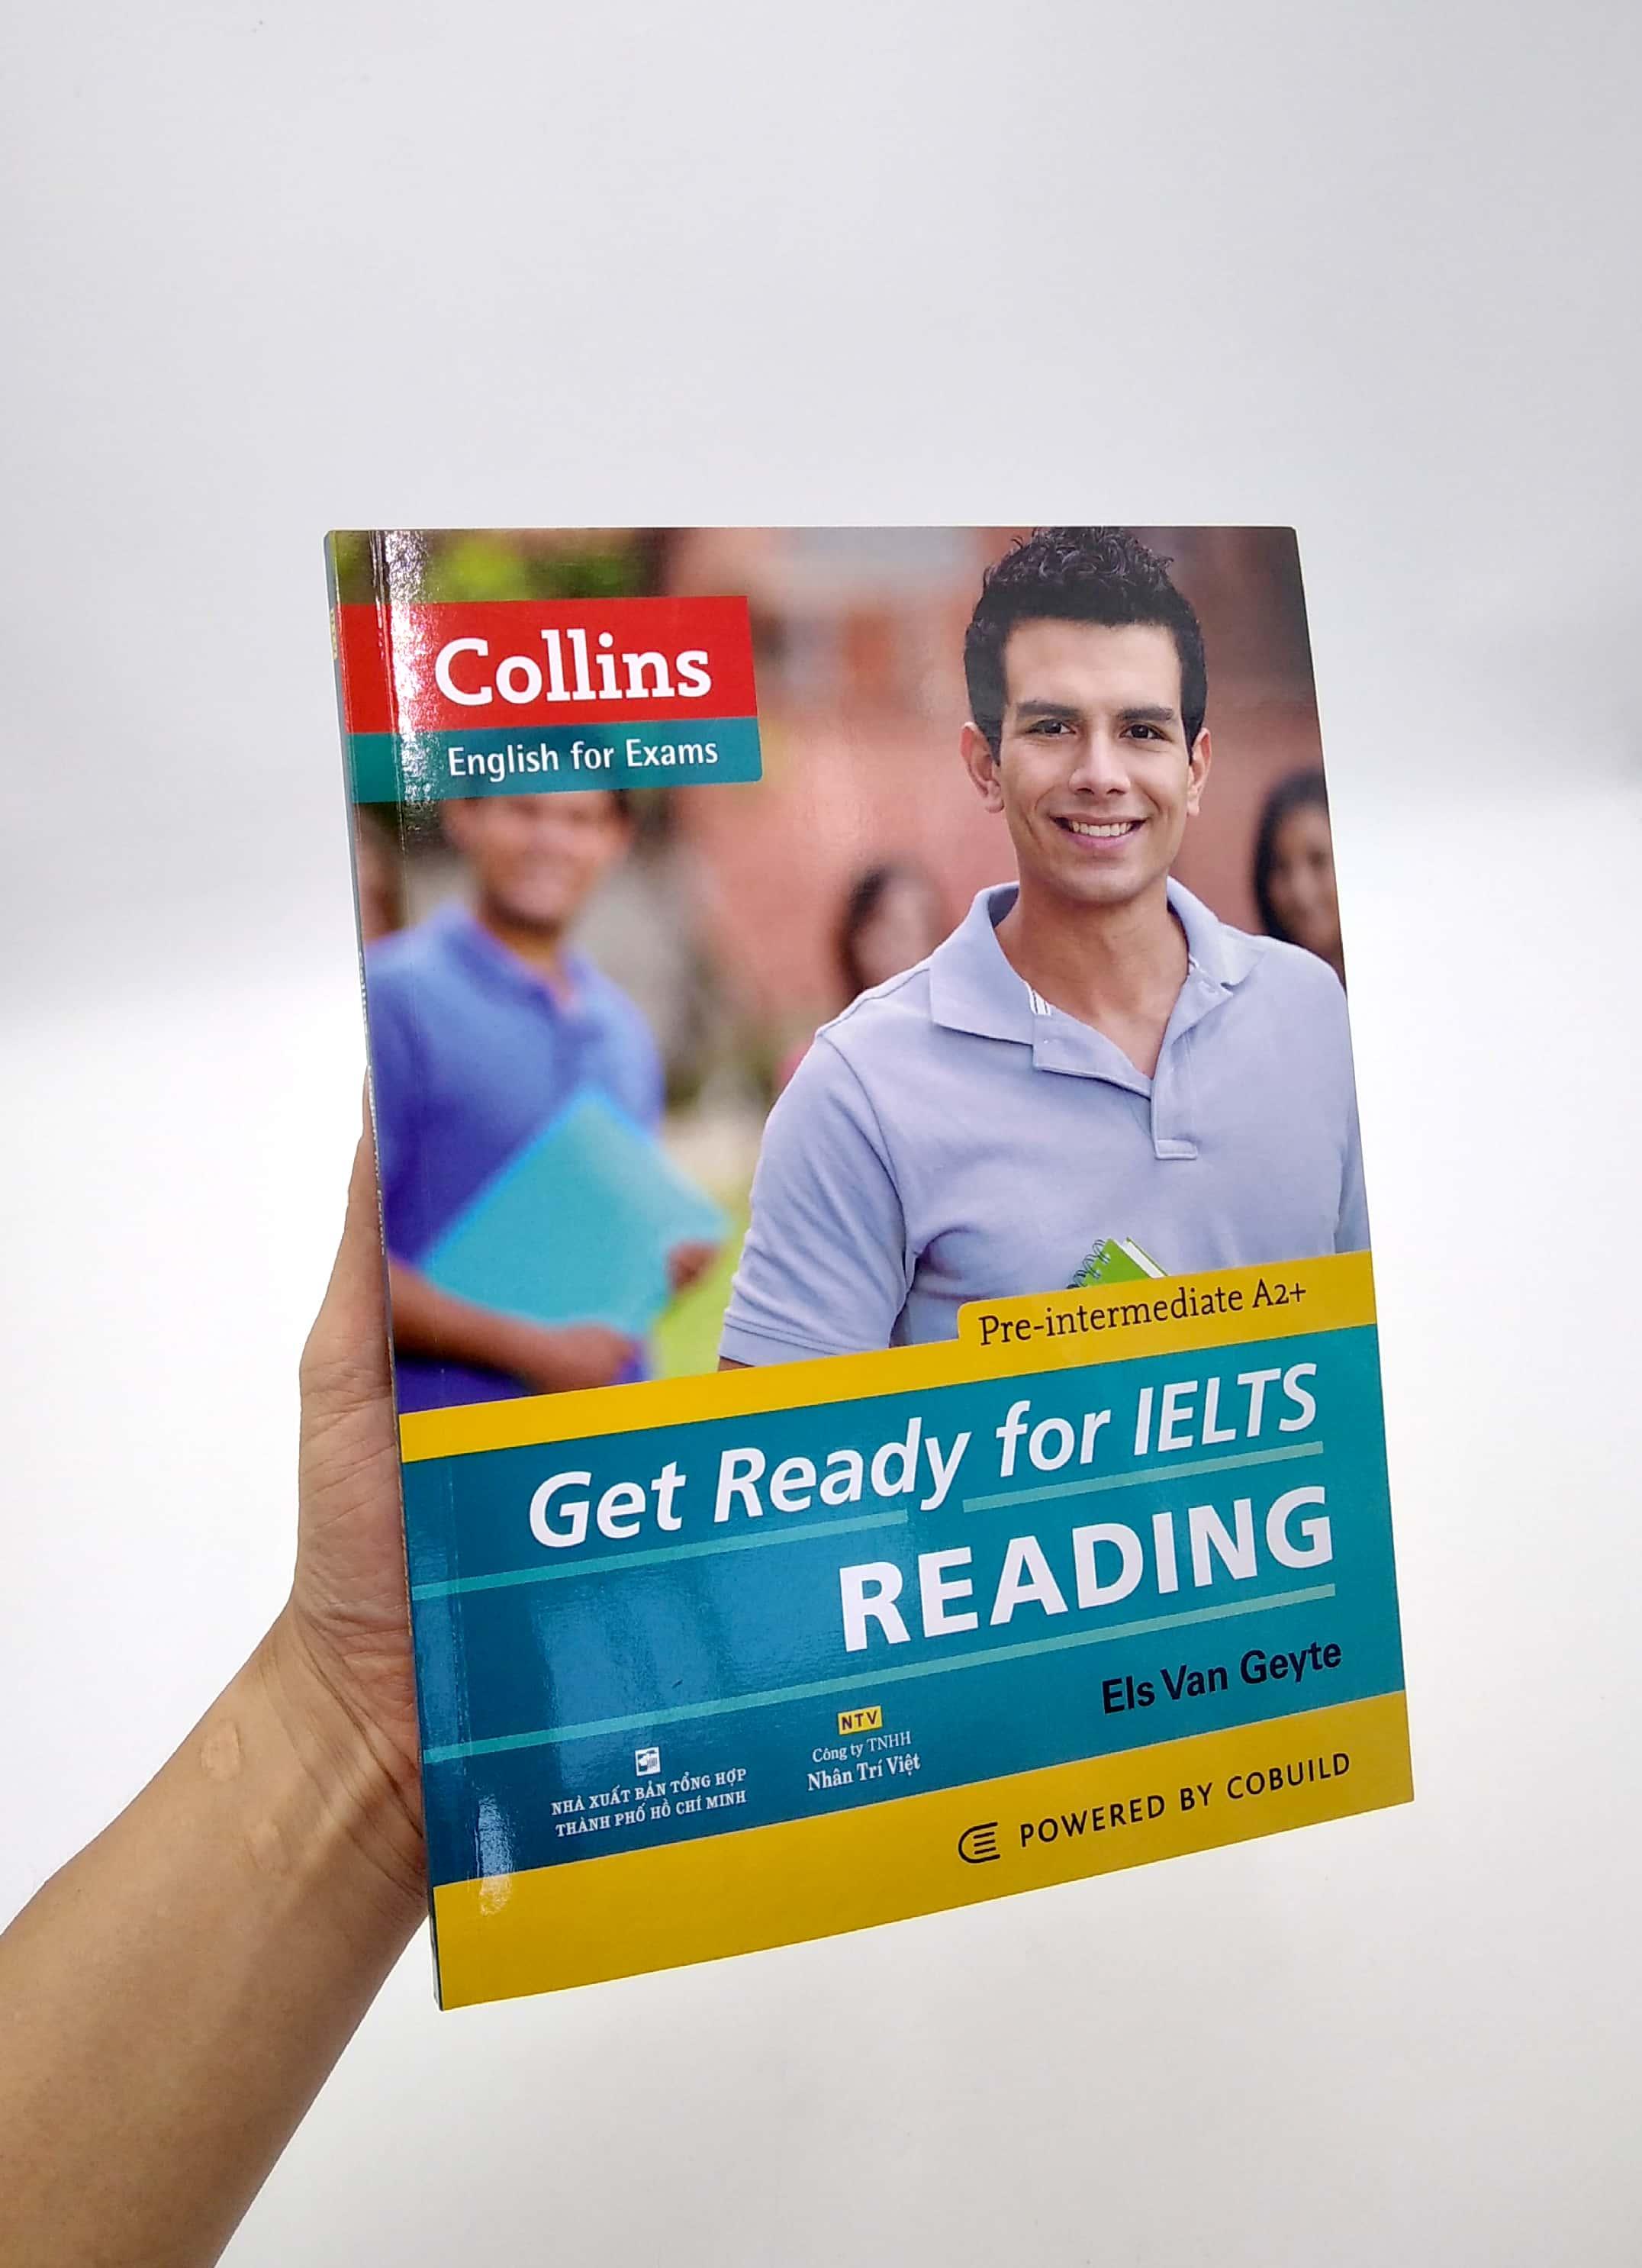 Collins - Get Ready For Ielts - Reading (Pre-Intermediate A2+)